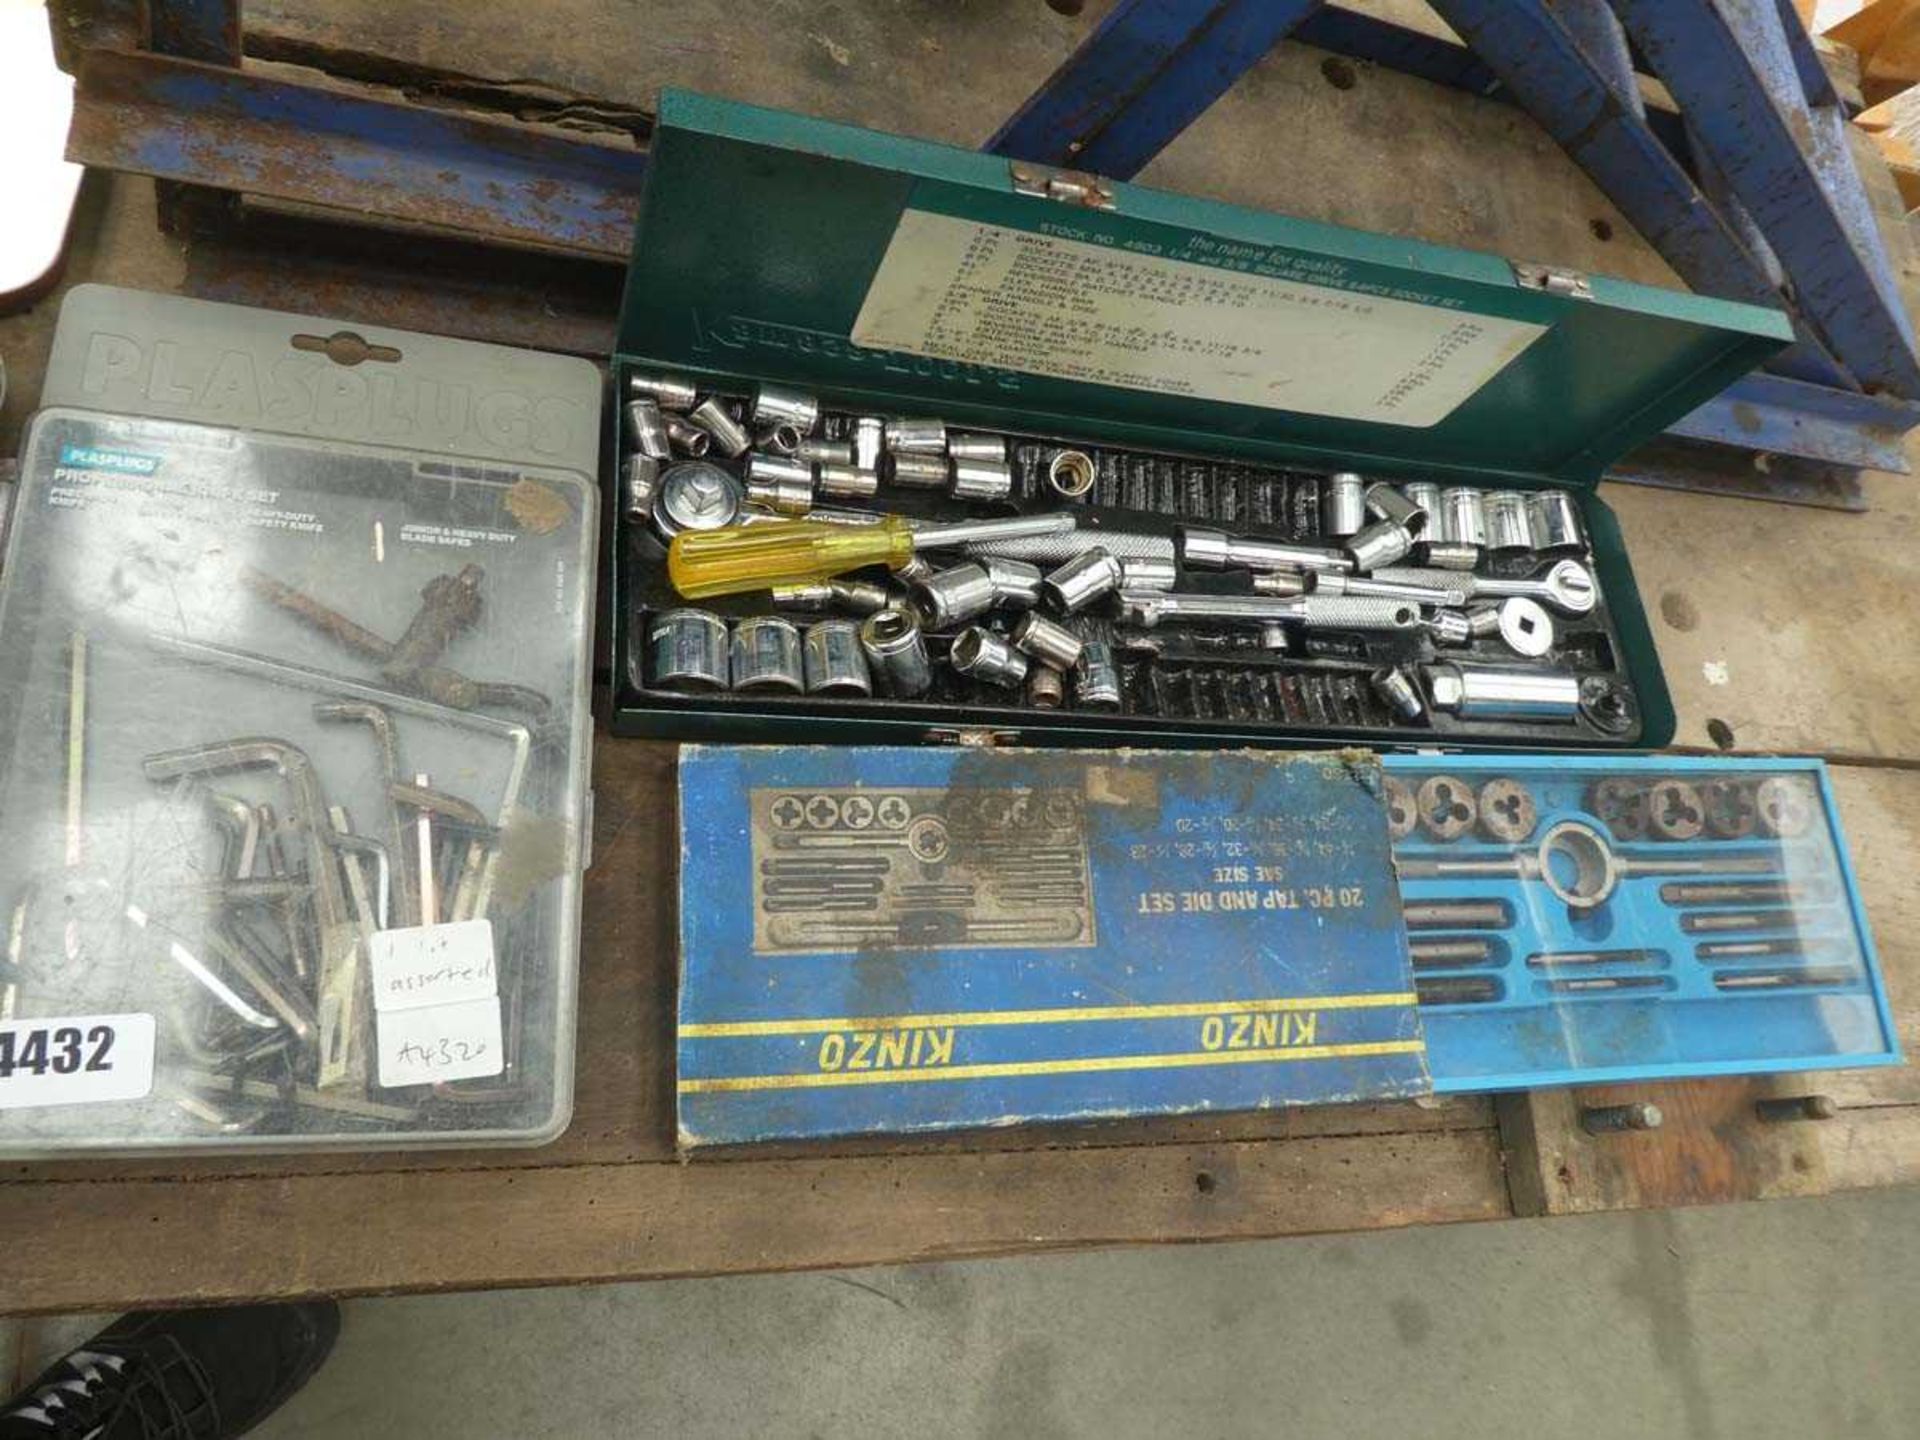 Quantity of various tools including a Stanley woodworking plane, drill bits, sockets, hex keys, etc - Image 4 of 4